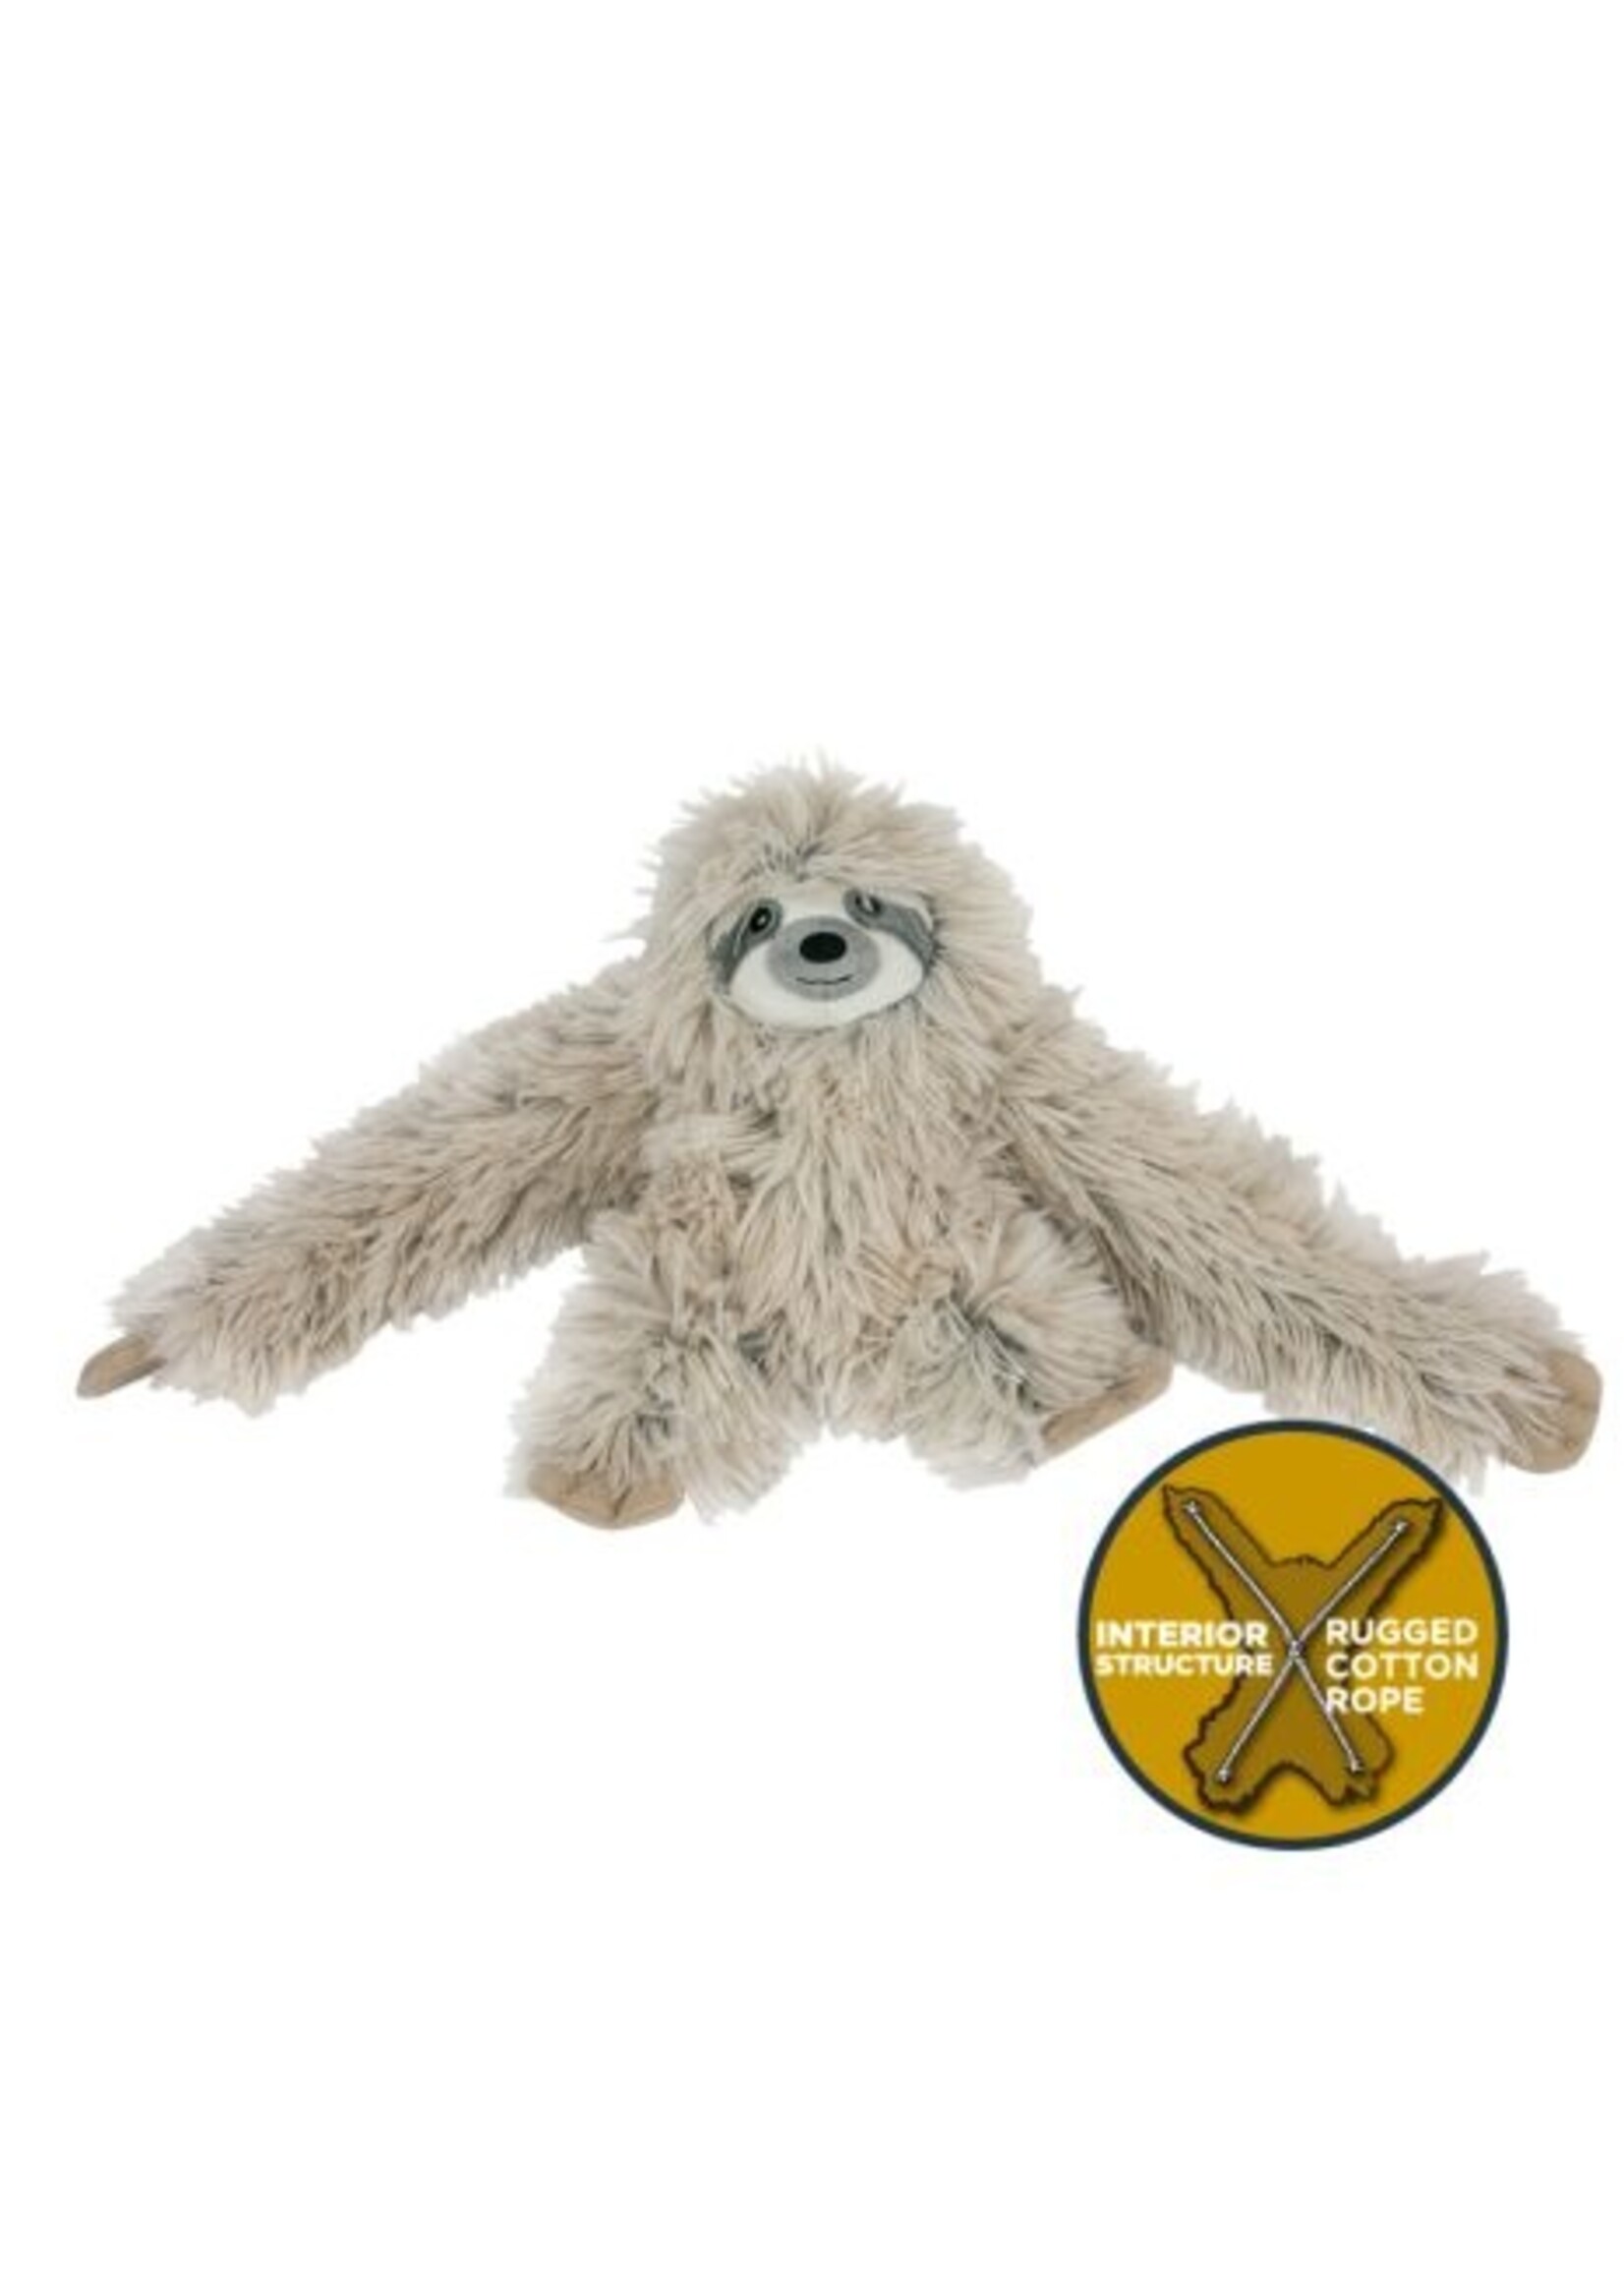 Tall Tails Tall Tails Rope Body Sloth Squeaker Toy 16"